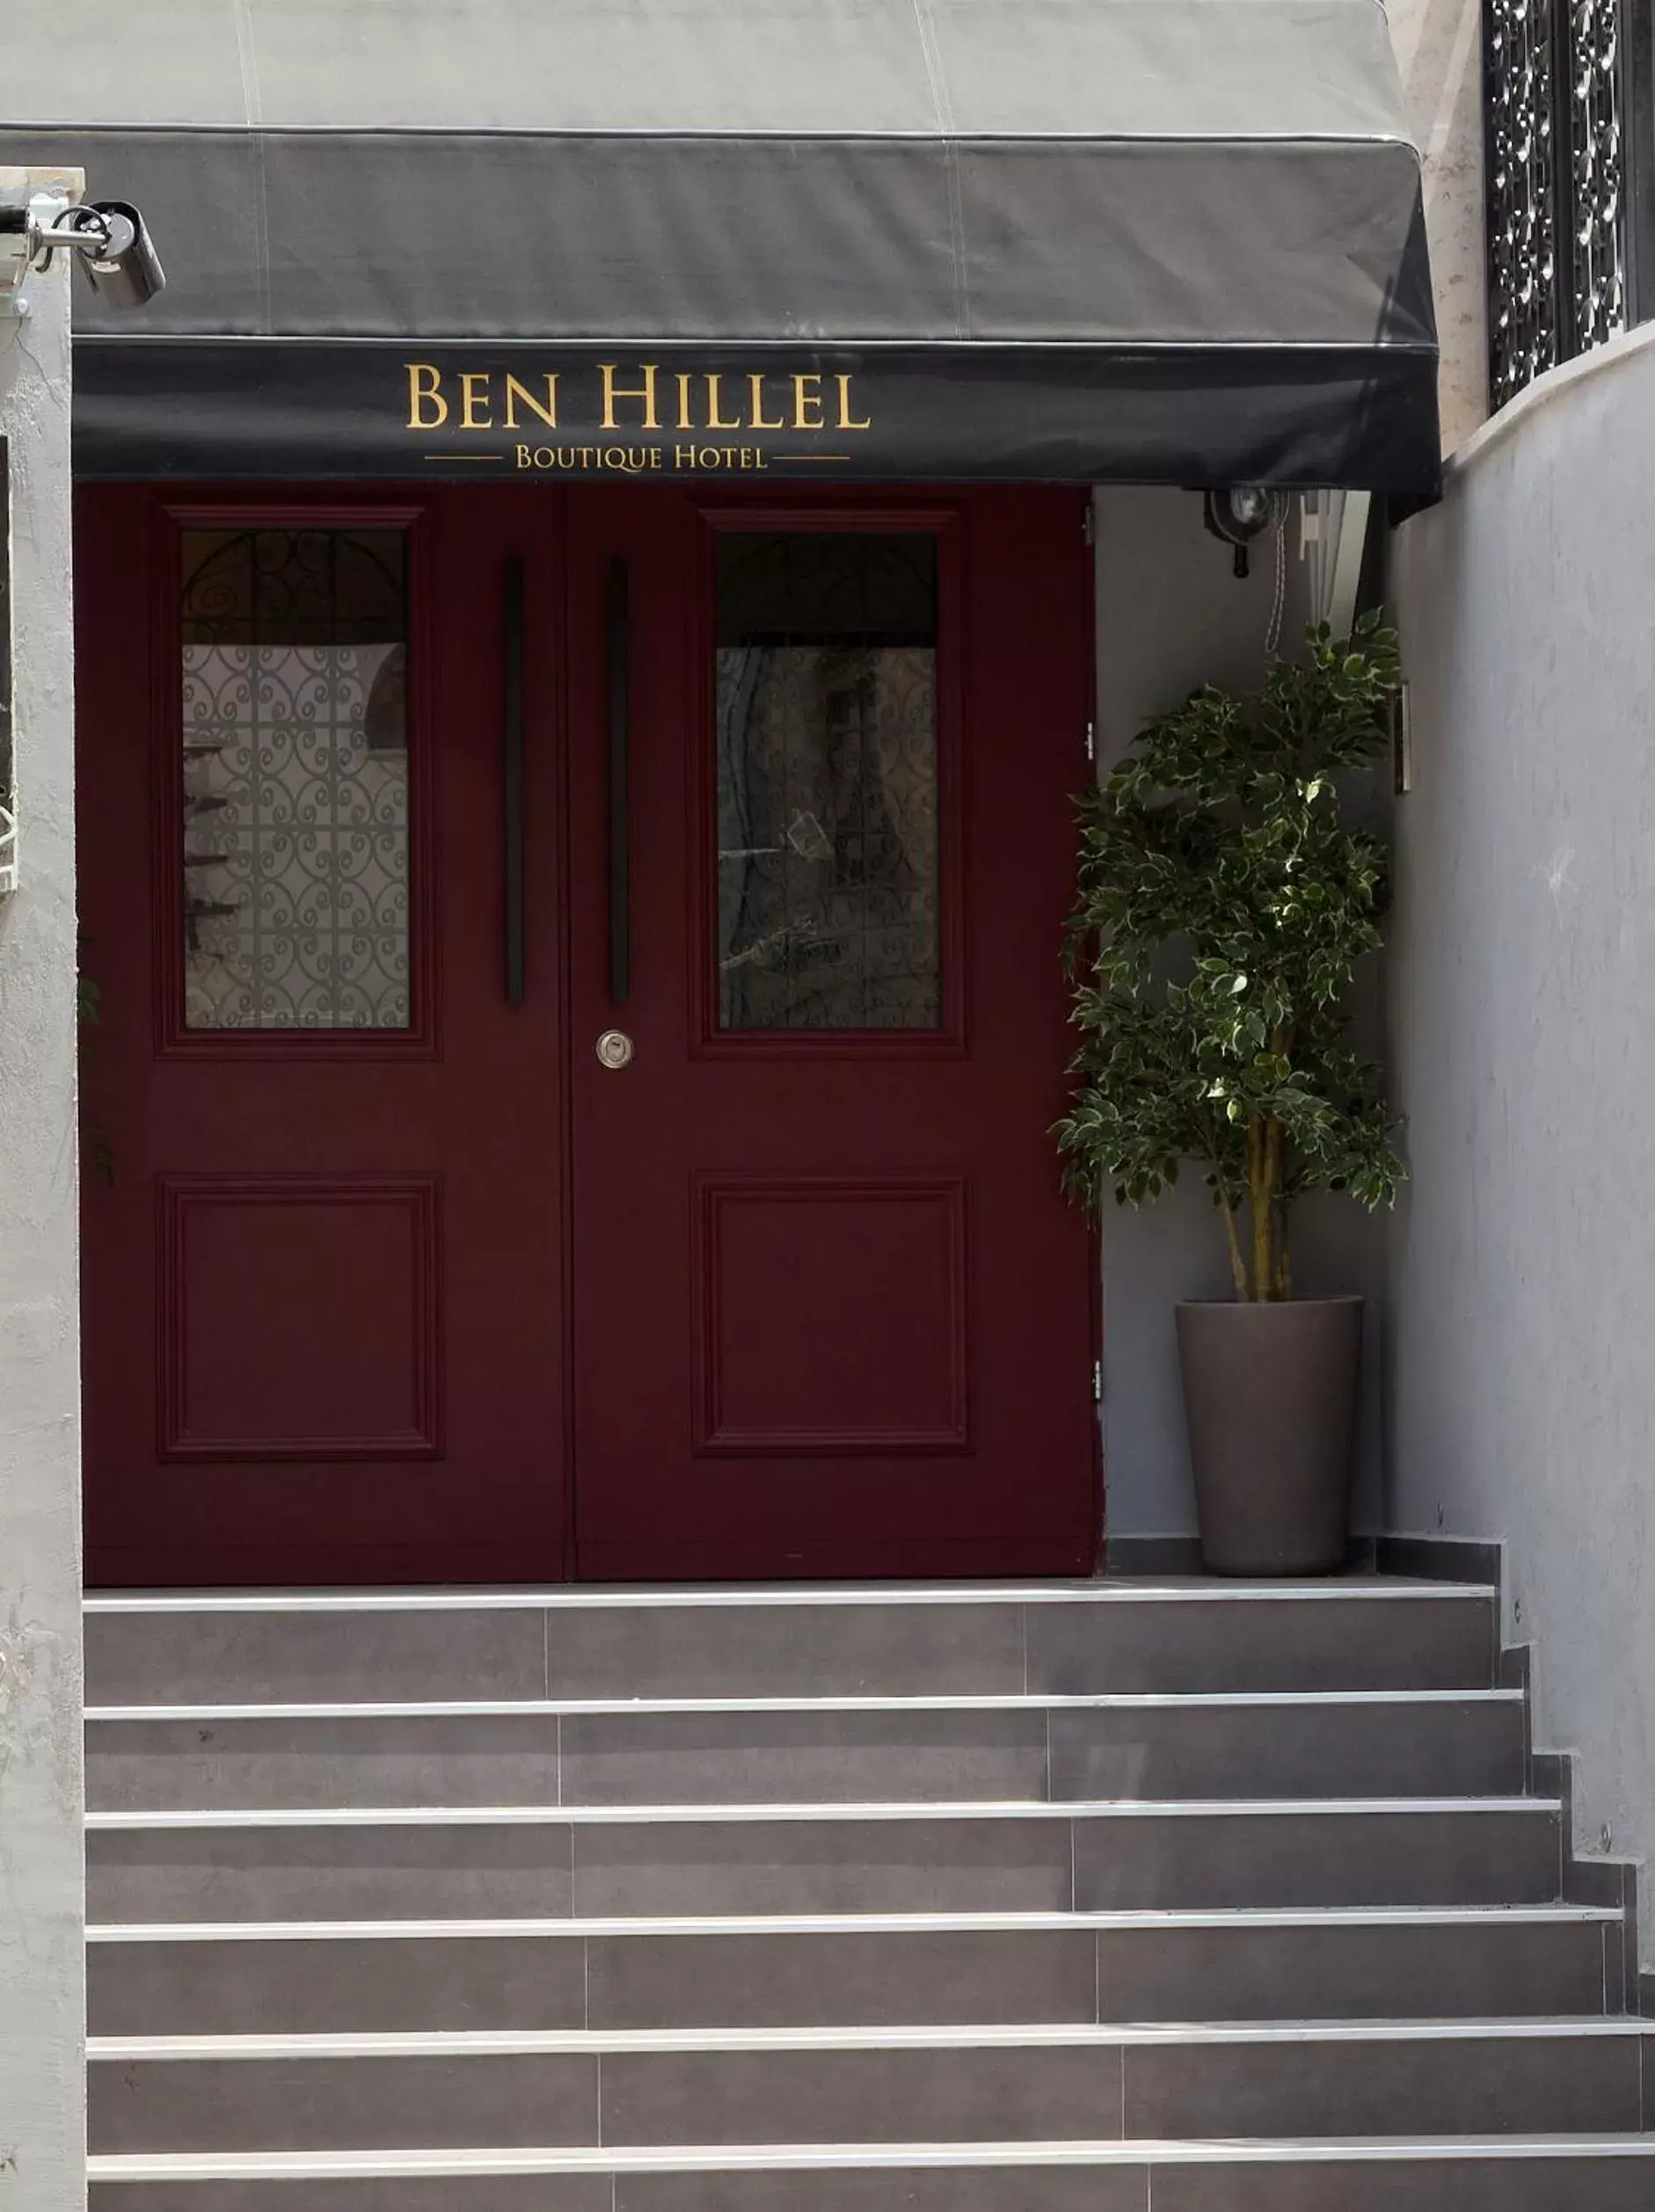 Area and facilities in Ben Hillel Boutique Hotel